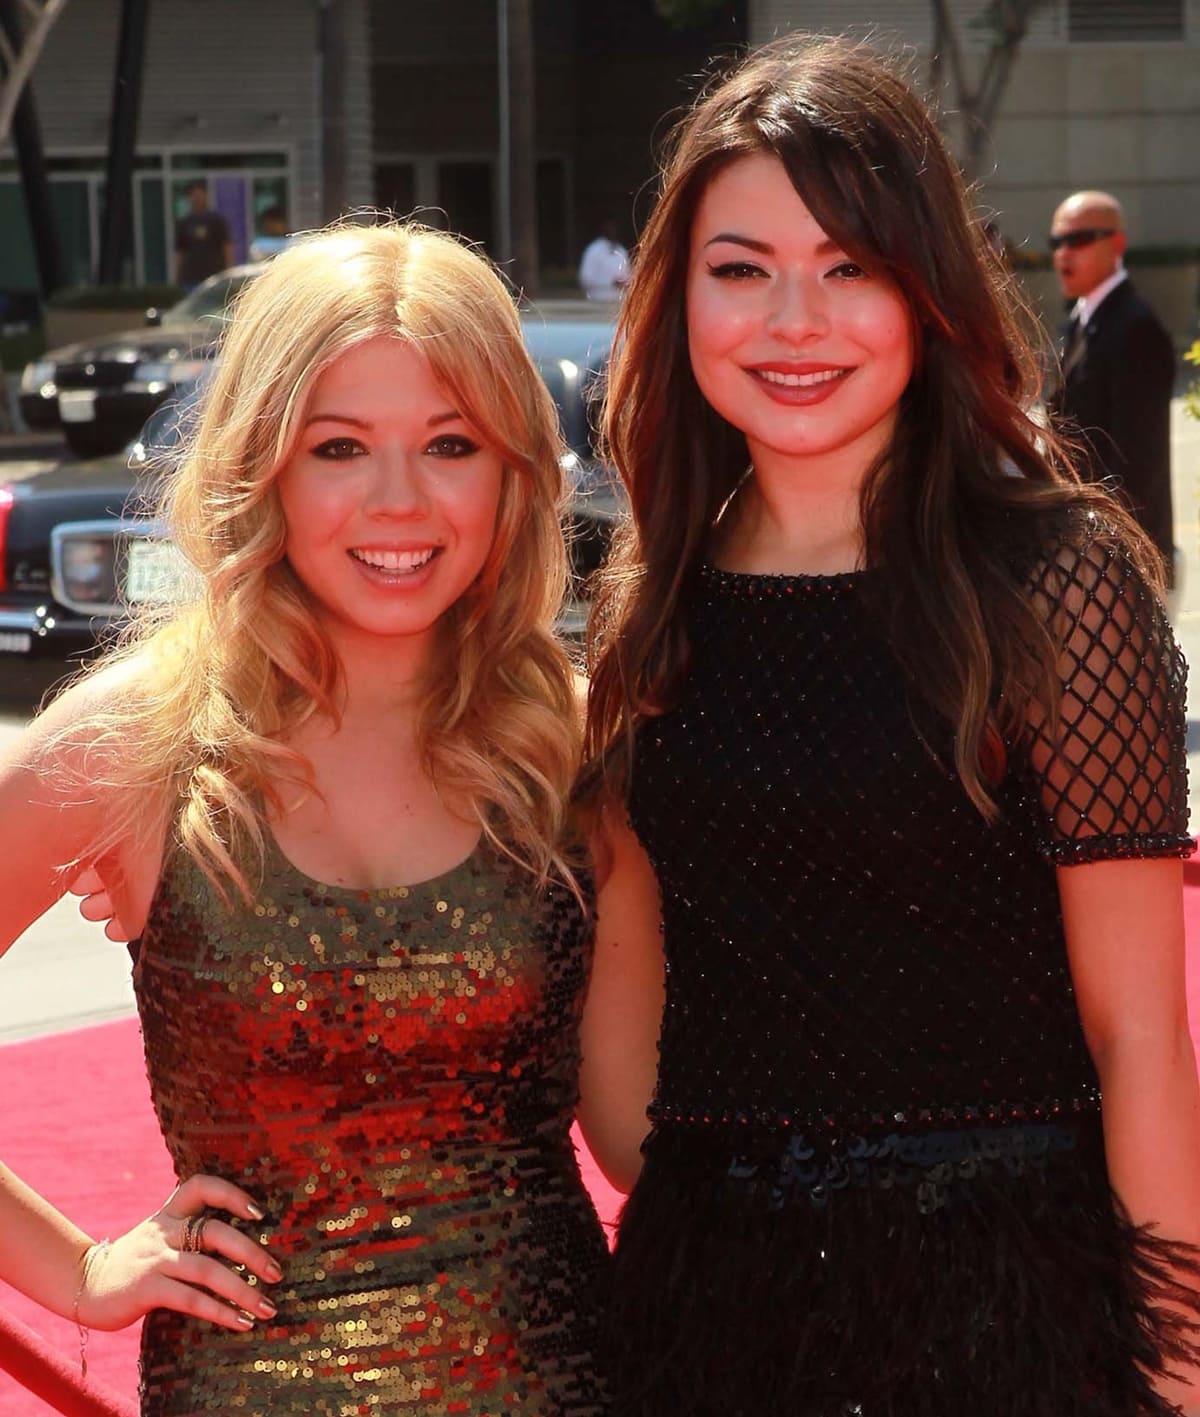 Miranda Cosgrove and Jennette McCurdy became friends starring in the American teen sitcom iCarly created by Dan Schneider